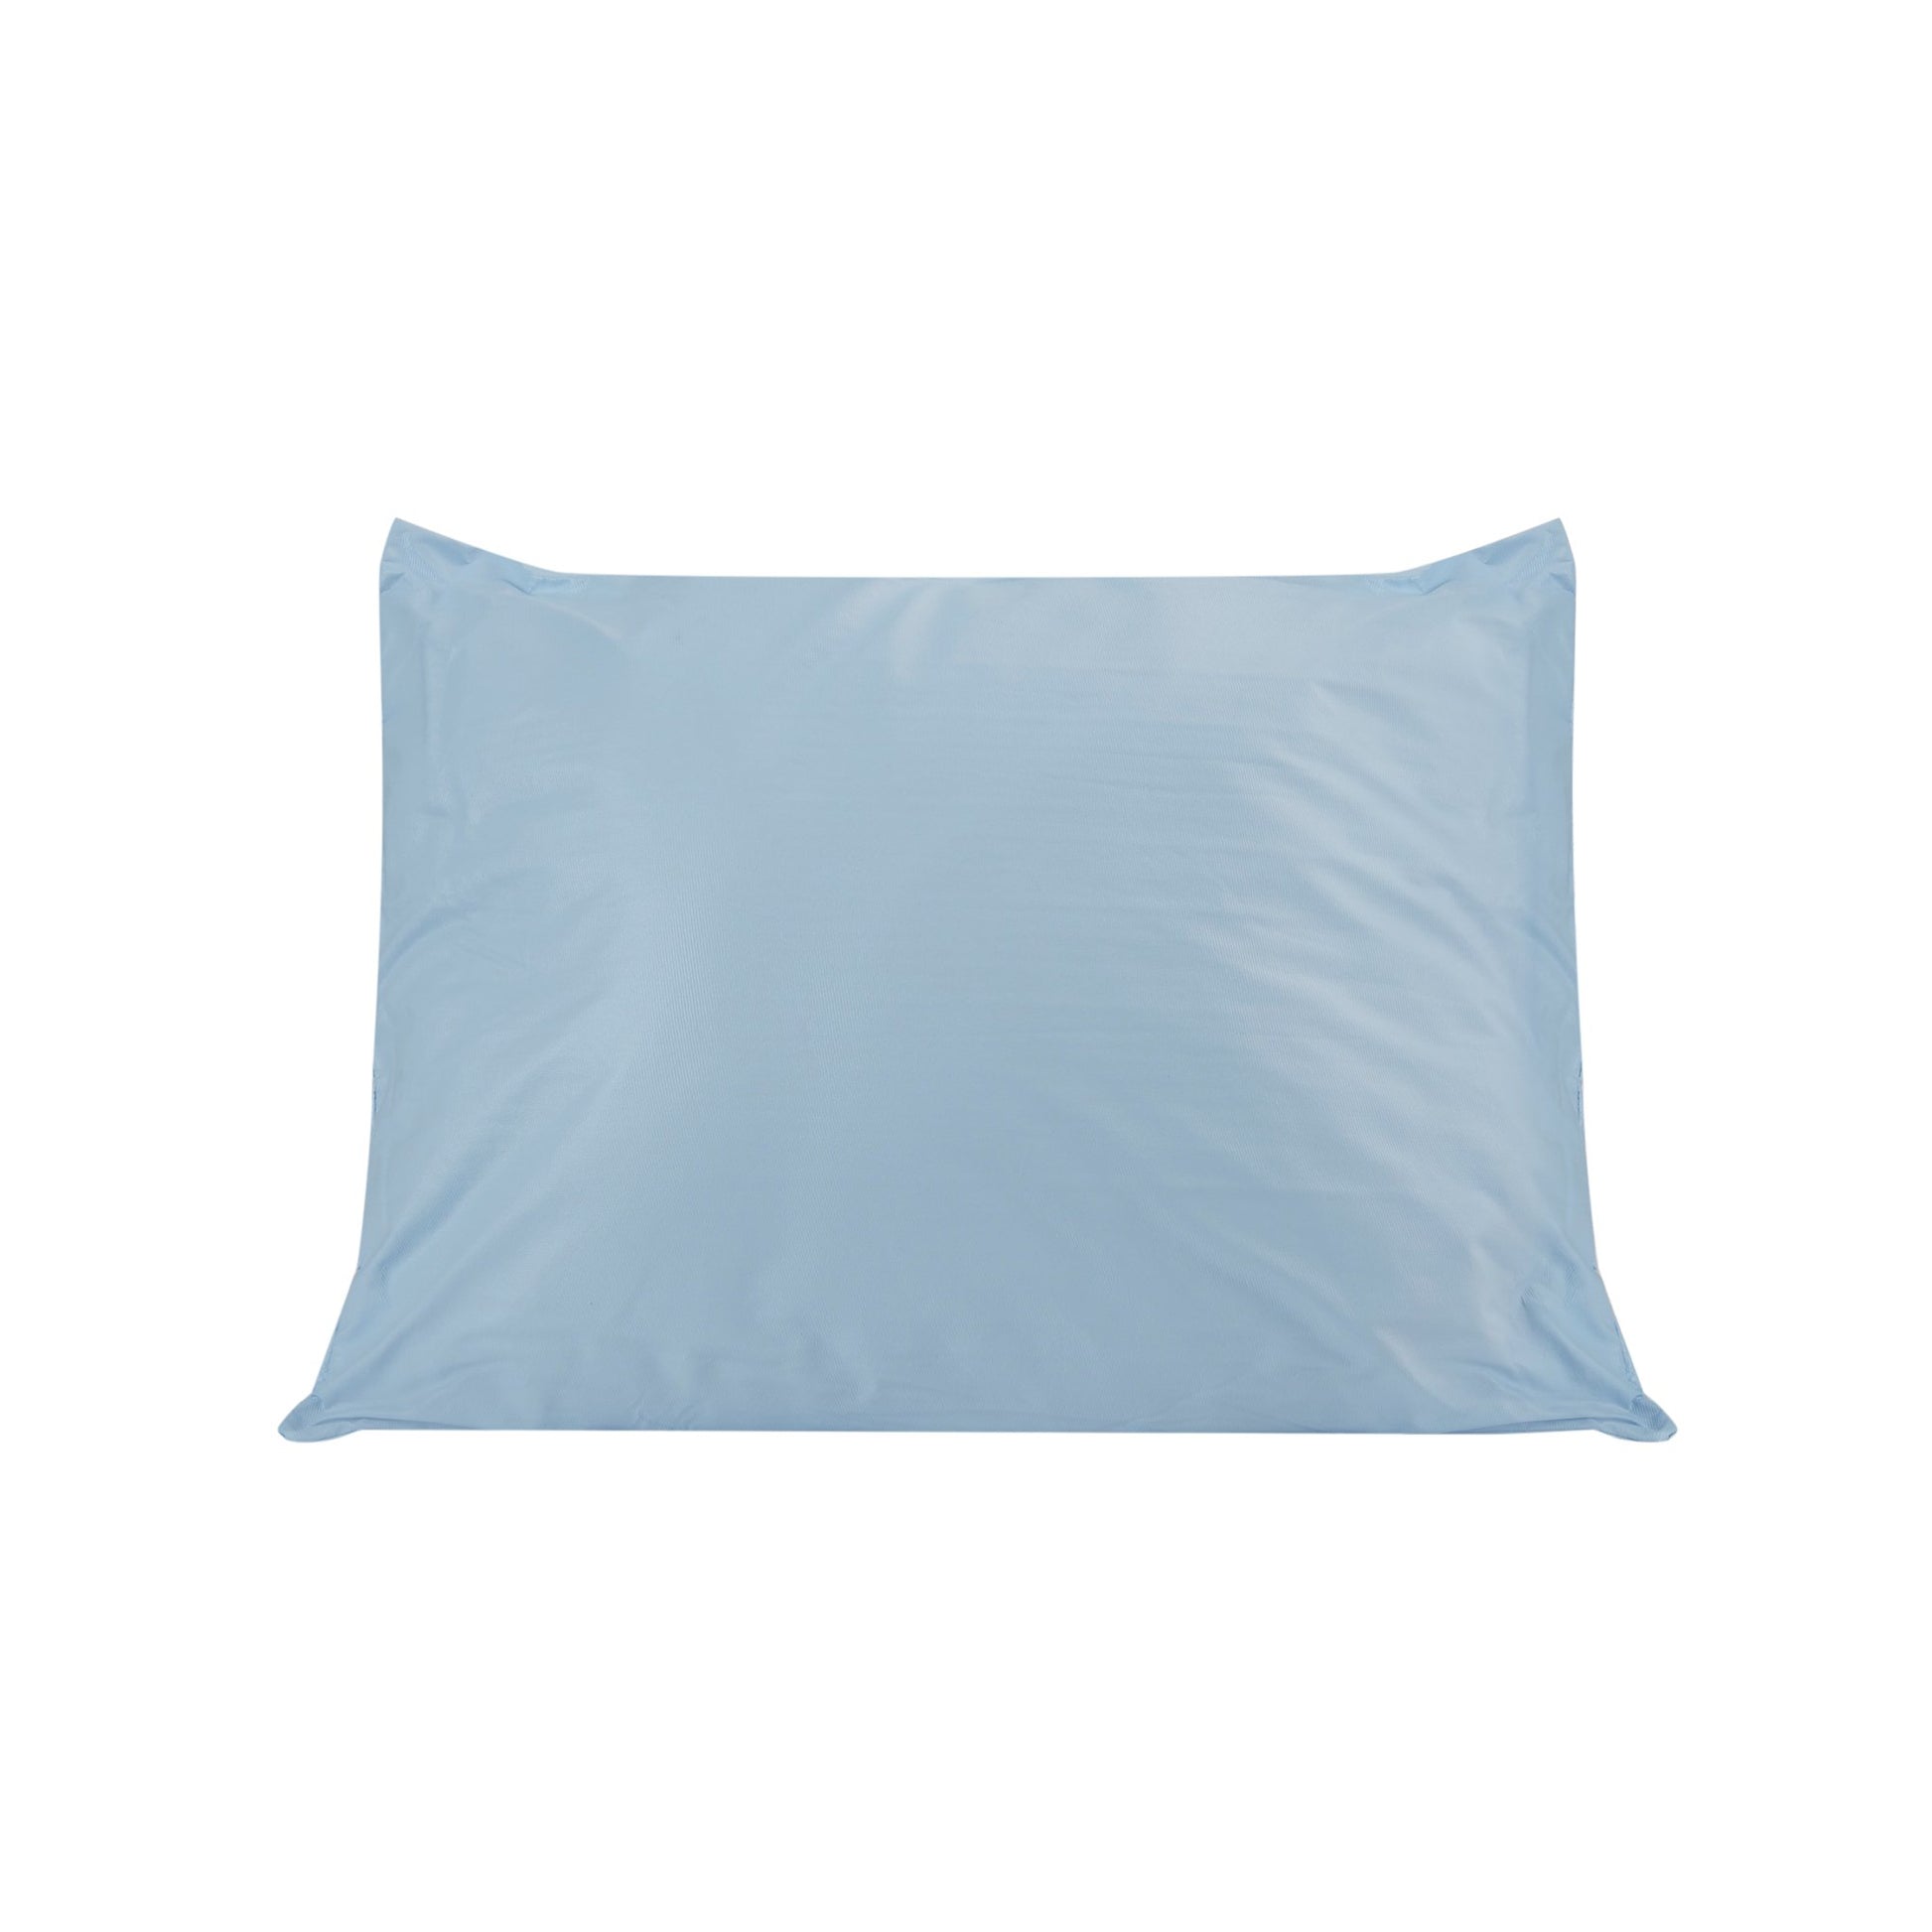 Mckesson Reusable Bed Pillow, 20 X 26 Inch, Blue, Sold As 12/Box Mckesson 41-2026-Bxf